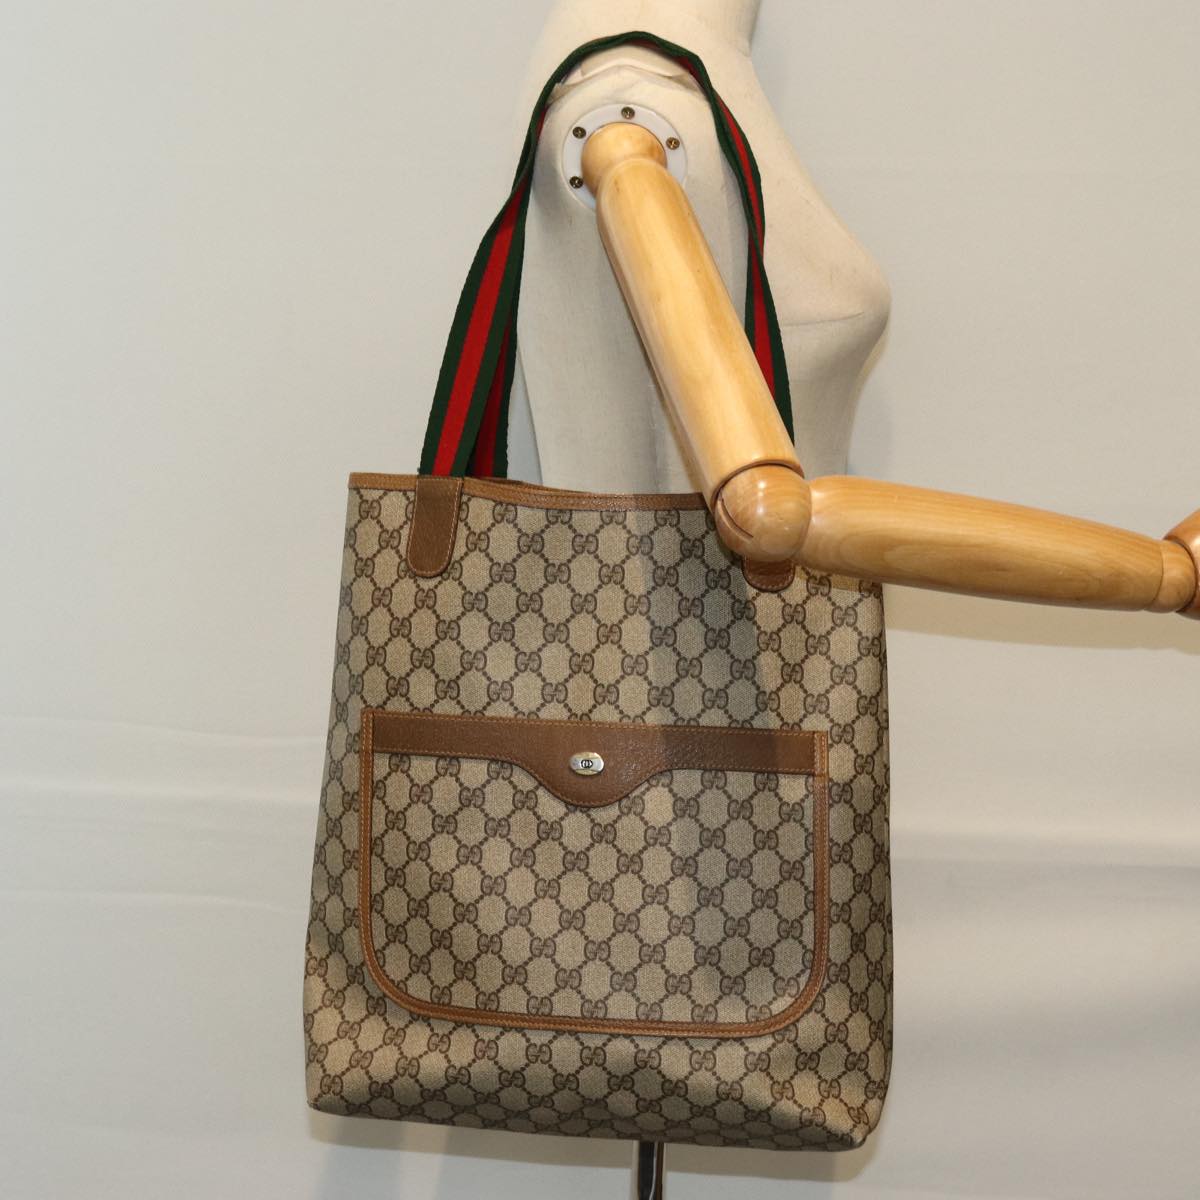 GUCCI GG Supreme Web Sherry Line Tote Bag PVC Beige Red 40 02 003 Auth 73612